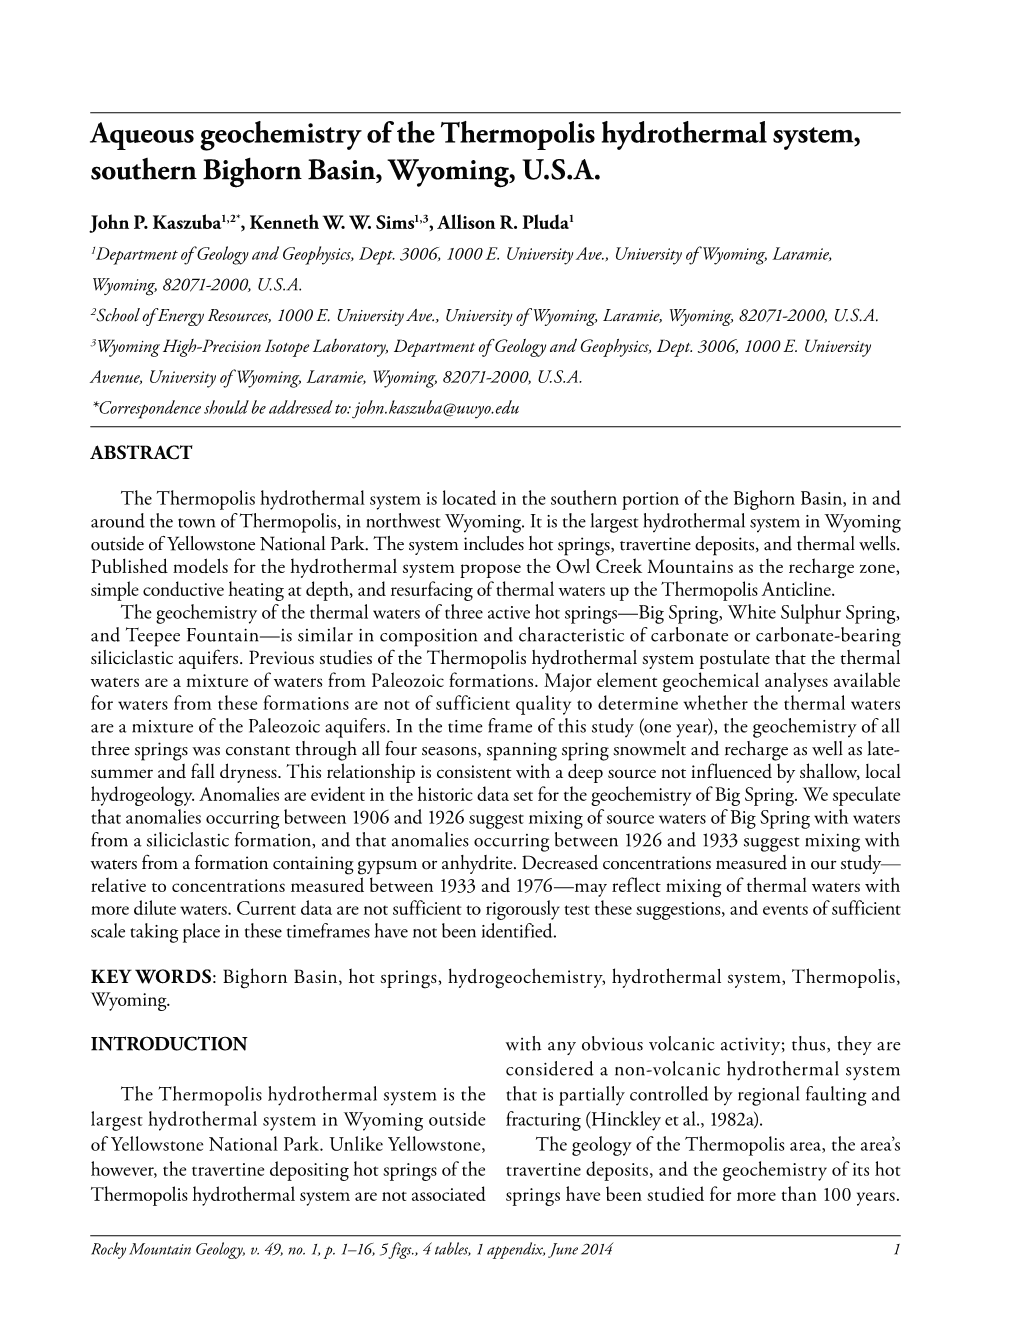 Aqueous Geochemistry of the Thermopolis Hydrothermal System, Southern Bighorn Basin, Wyoming, U.S.A